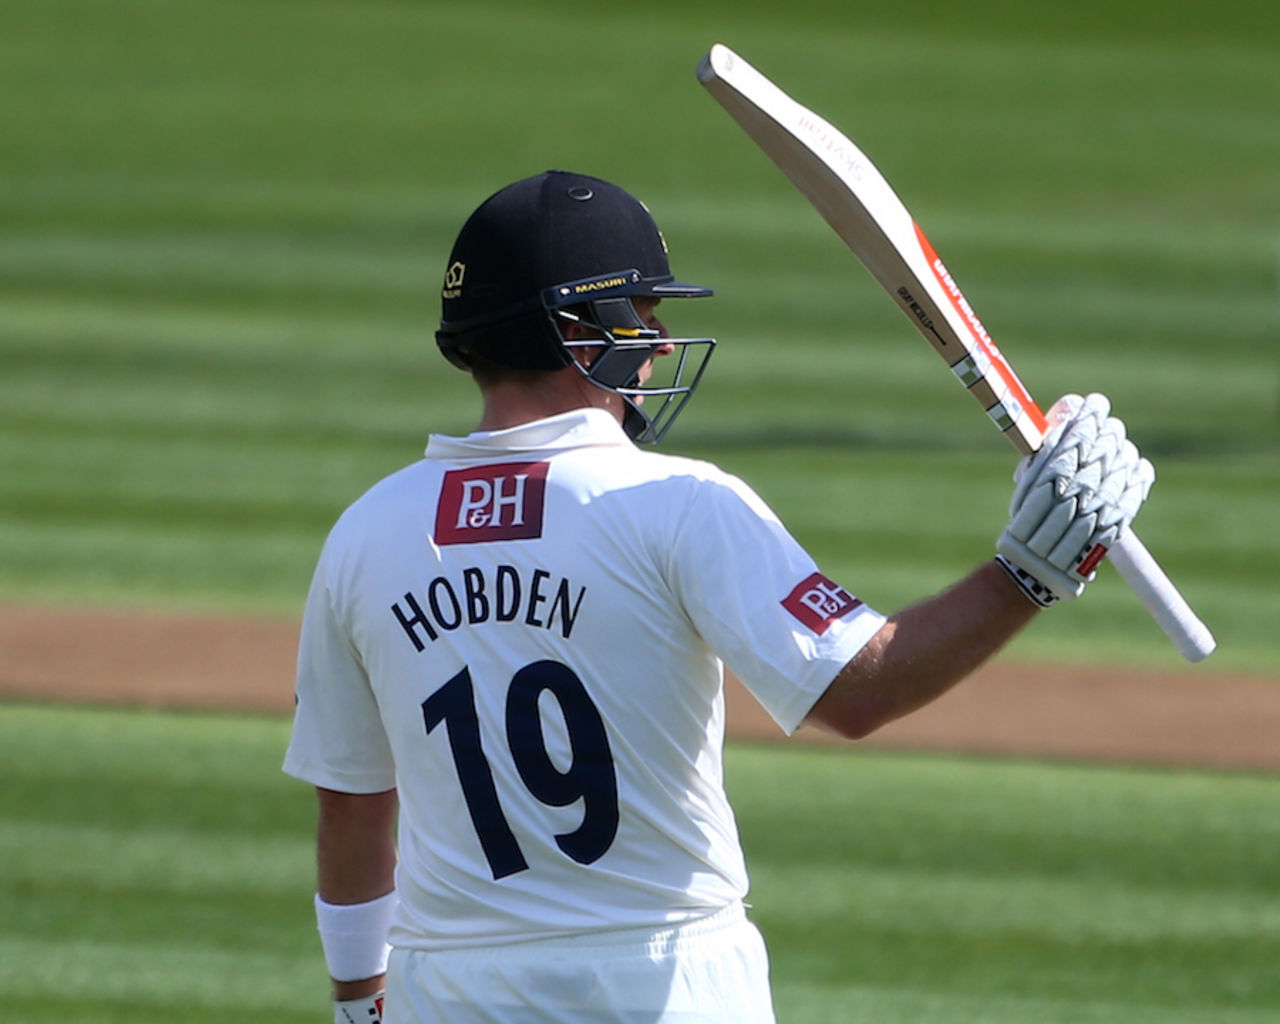 In memory: Chris Nash batted in Matthew Hobden's number, Sussex v Essex, Specsavers County Championship, Division Two, Hove, 1st day, April 17, 2016